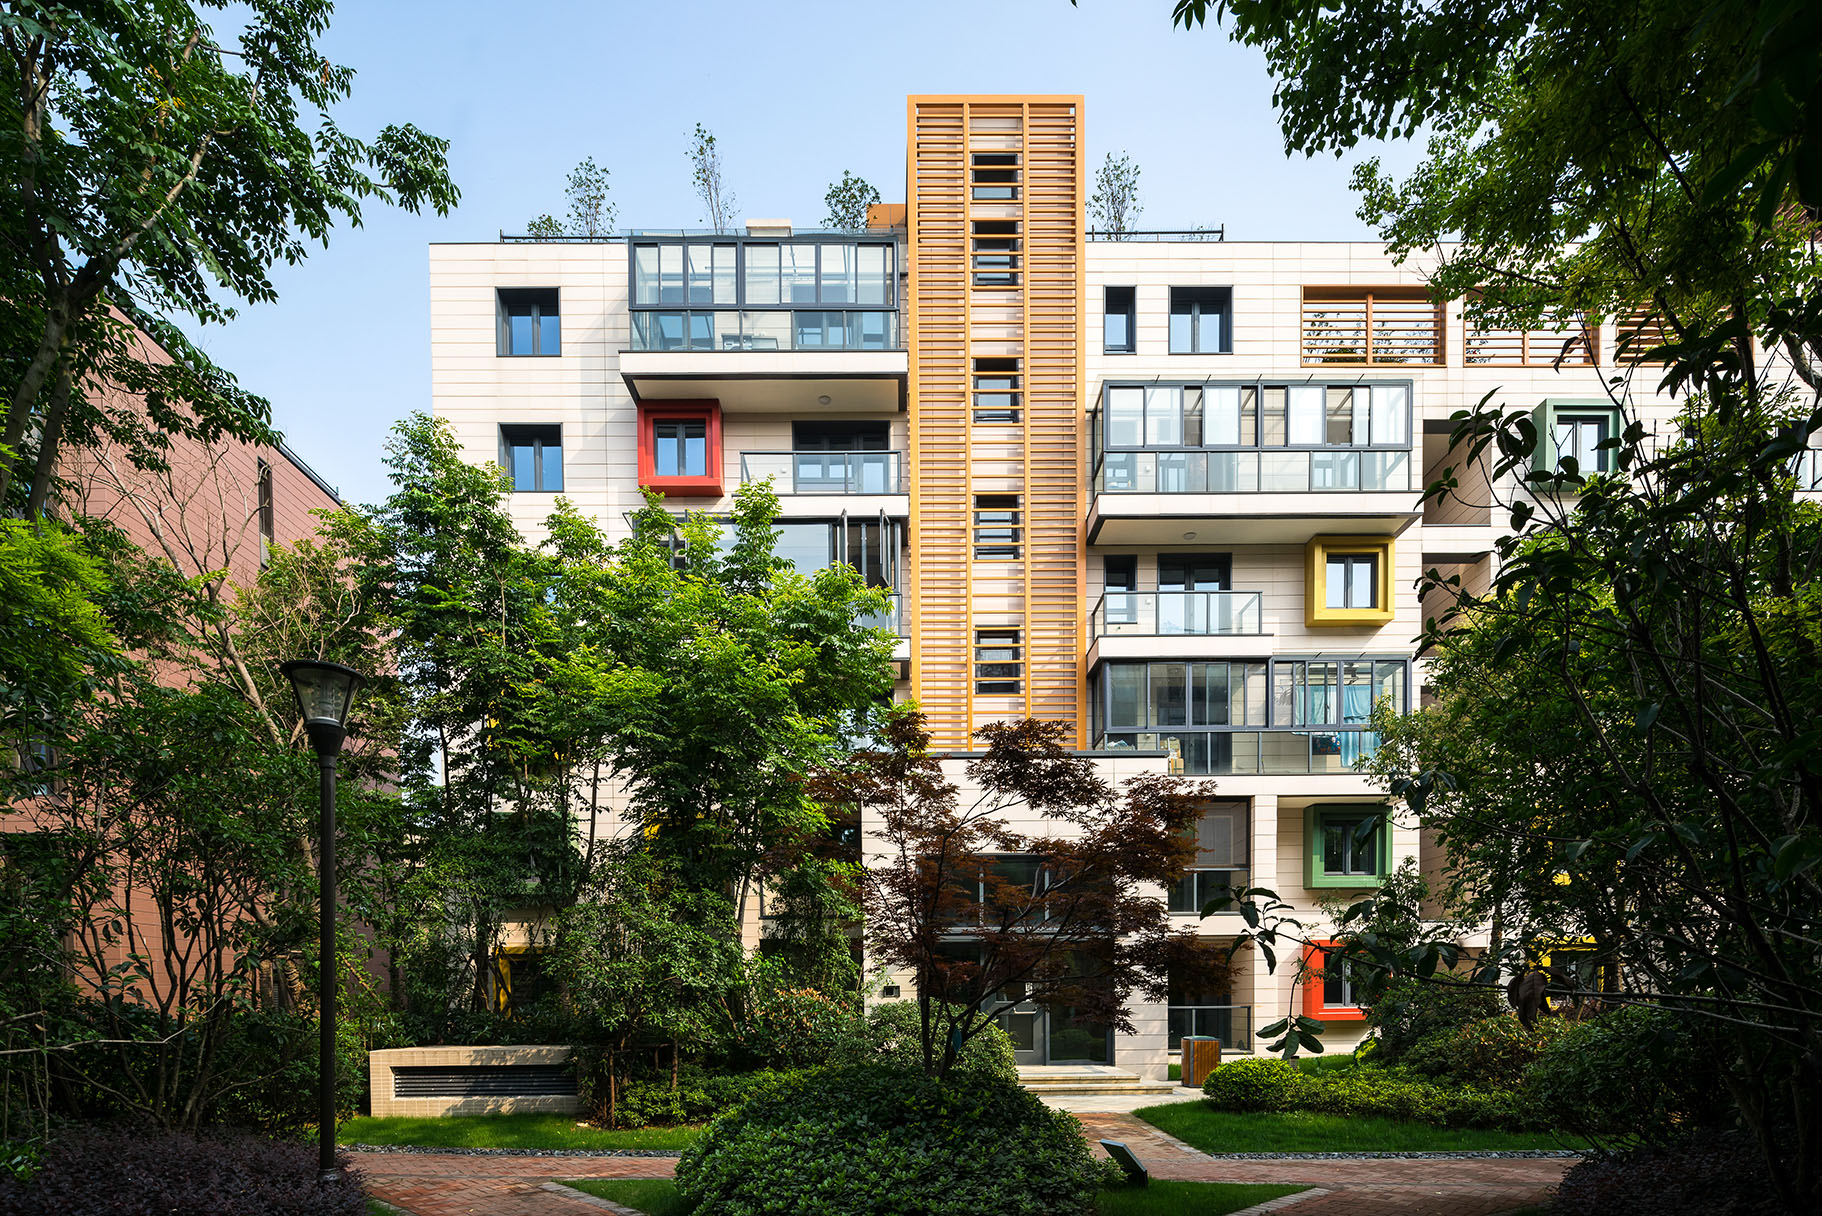 Landsea Eco-Housing in Nanjing, China, a sustainable and culturally-responsive apartment building showcasing internationally recognised green technologies, with a landscaped site, ample recreational facilities, and a design that accommodates extended families.